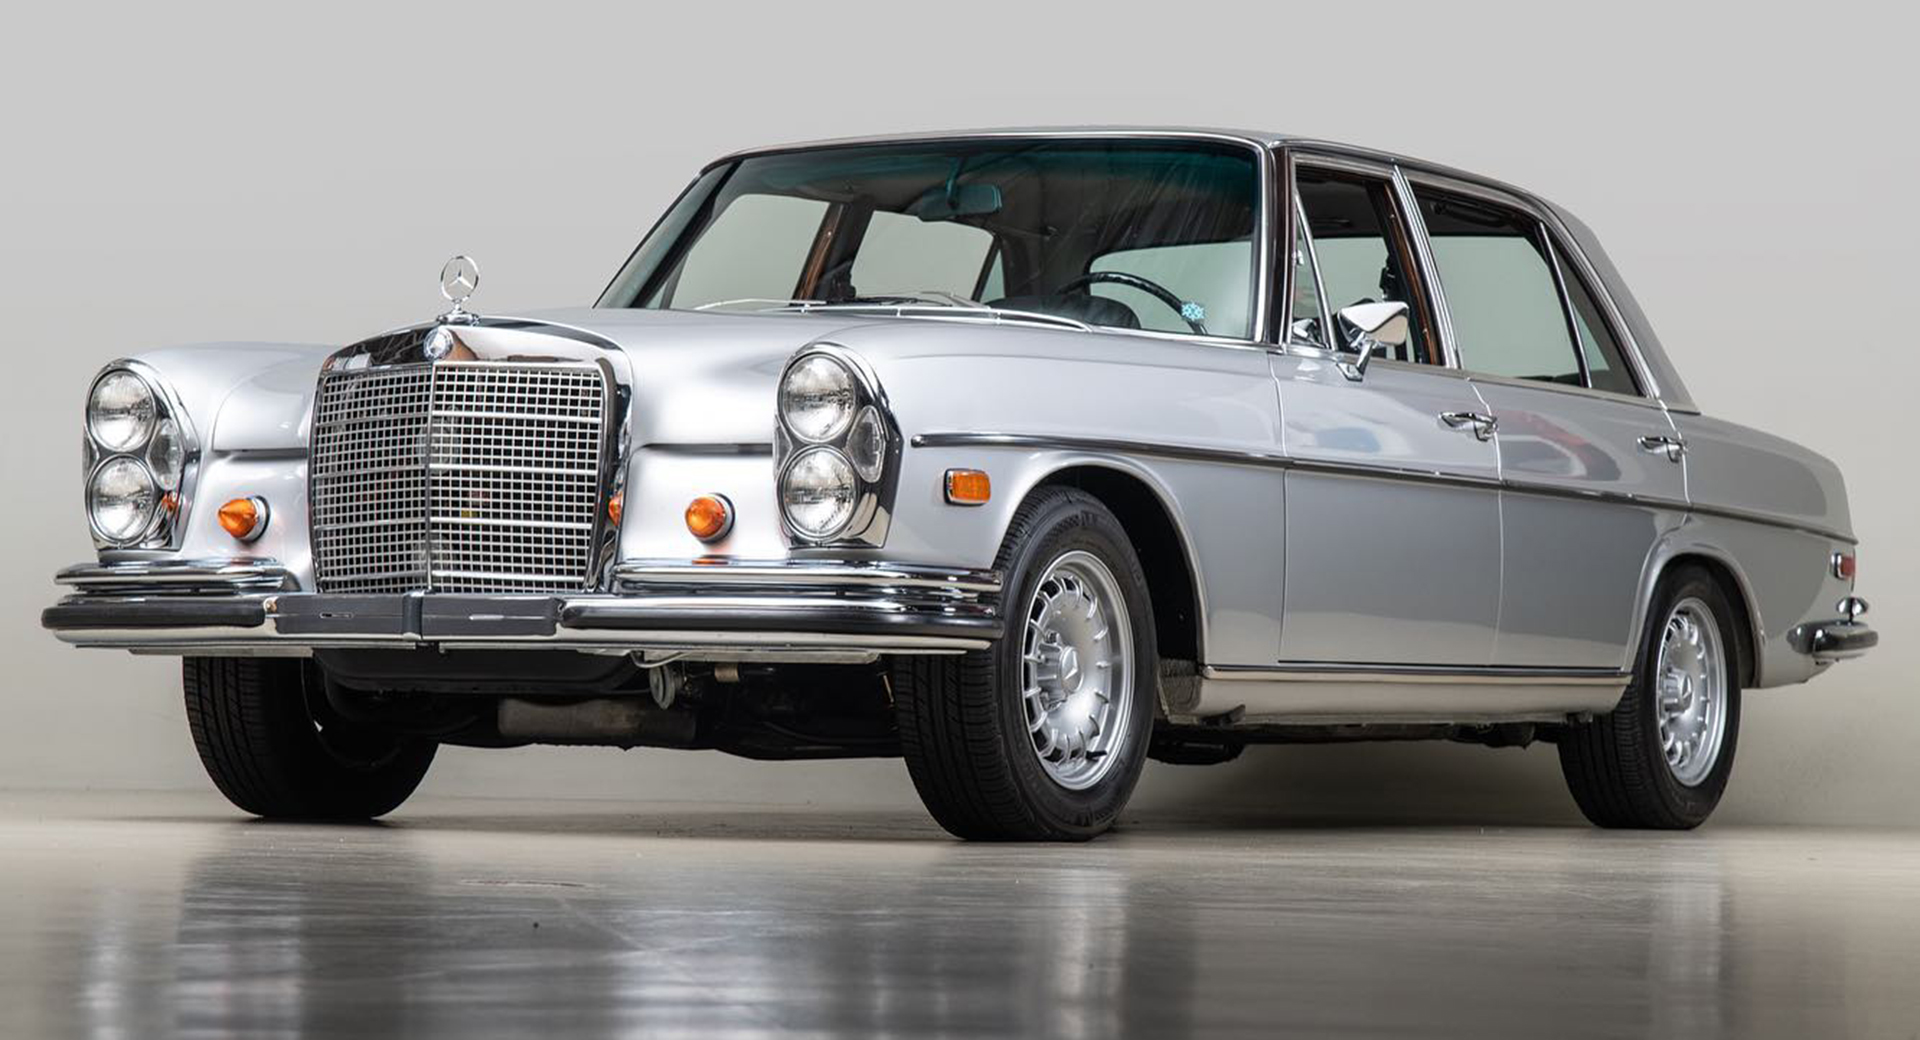 1969 Mercedes-Benz 300 SEL 6.3 Is The Epitome Of Elegance | Carscoops